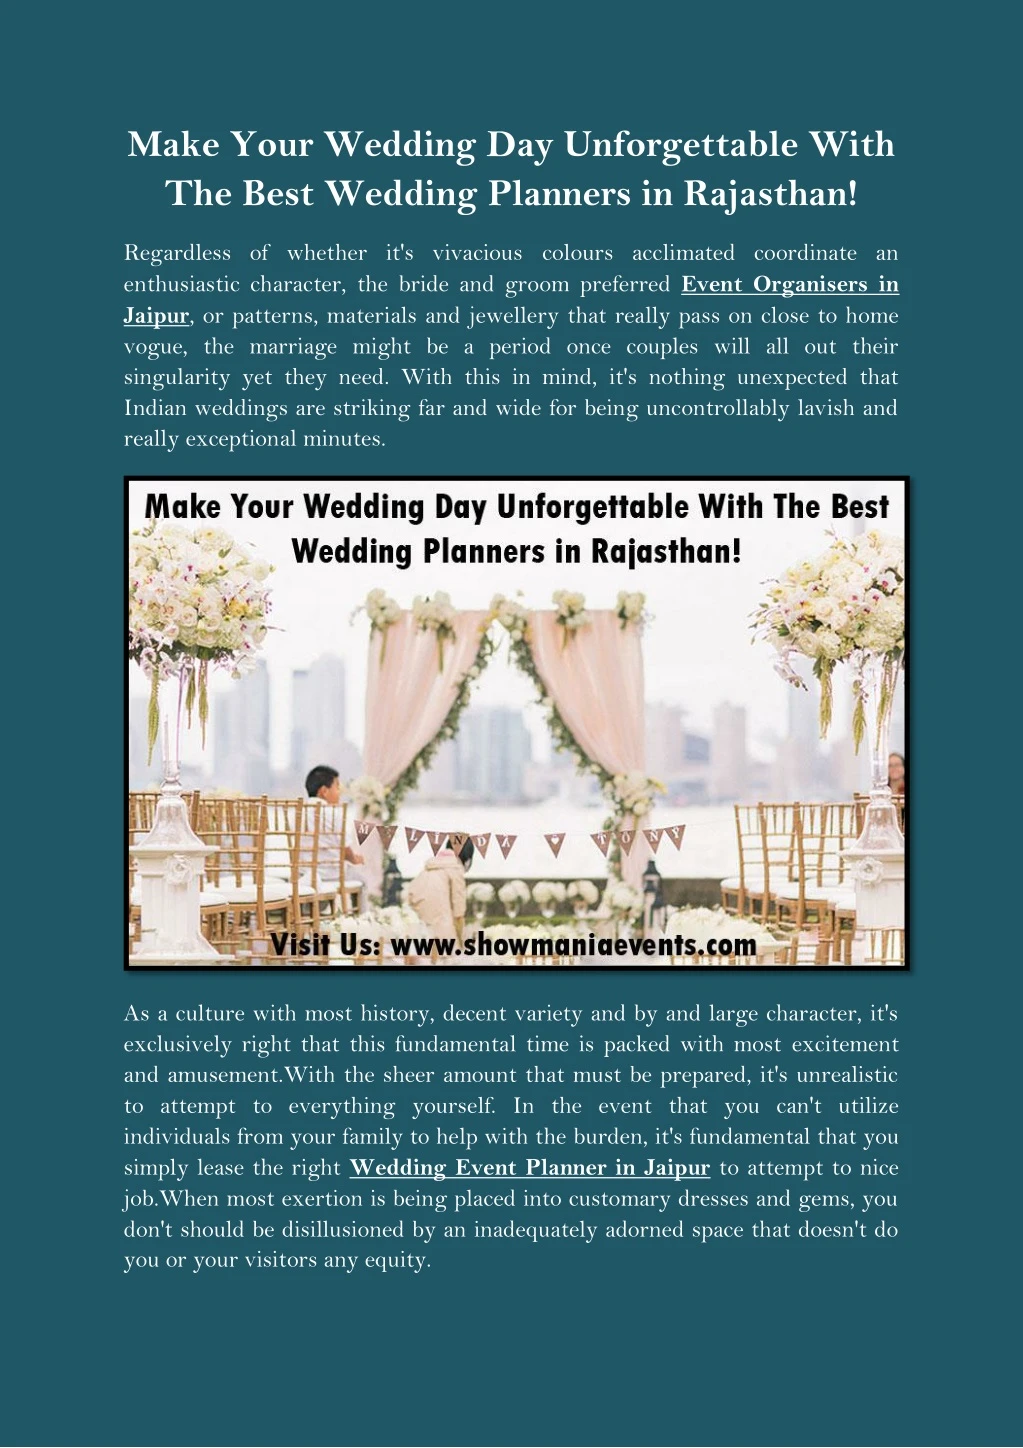 make your wedding day unforgettable with the best